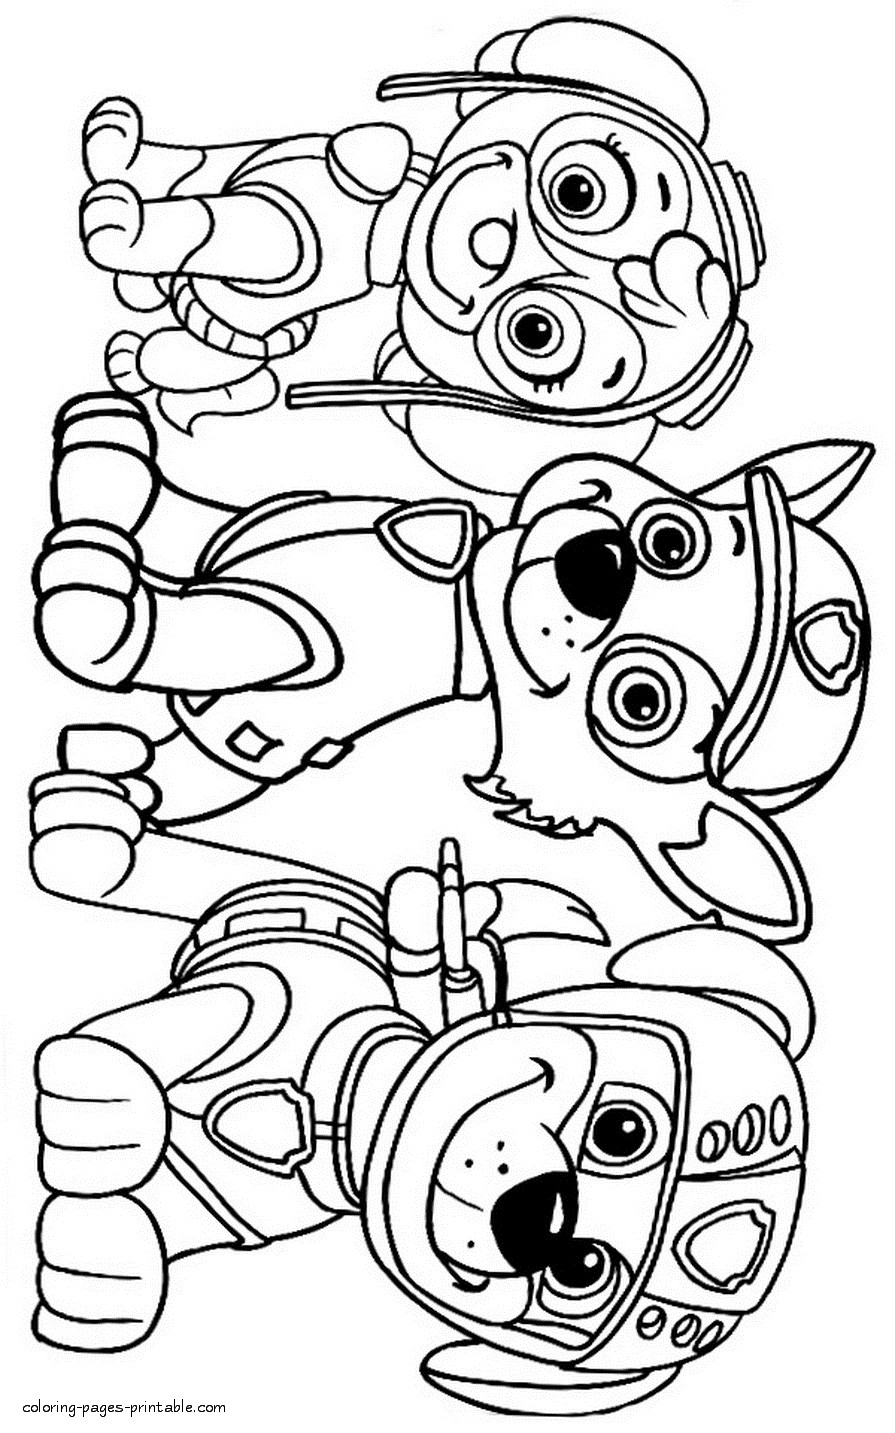 Paw Patrol Badges Coloring Pages at GetColorings.com | Free printable